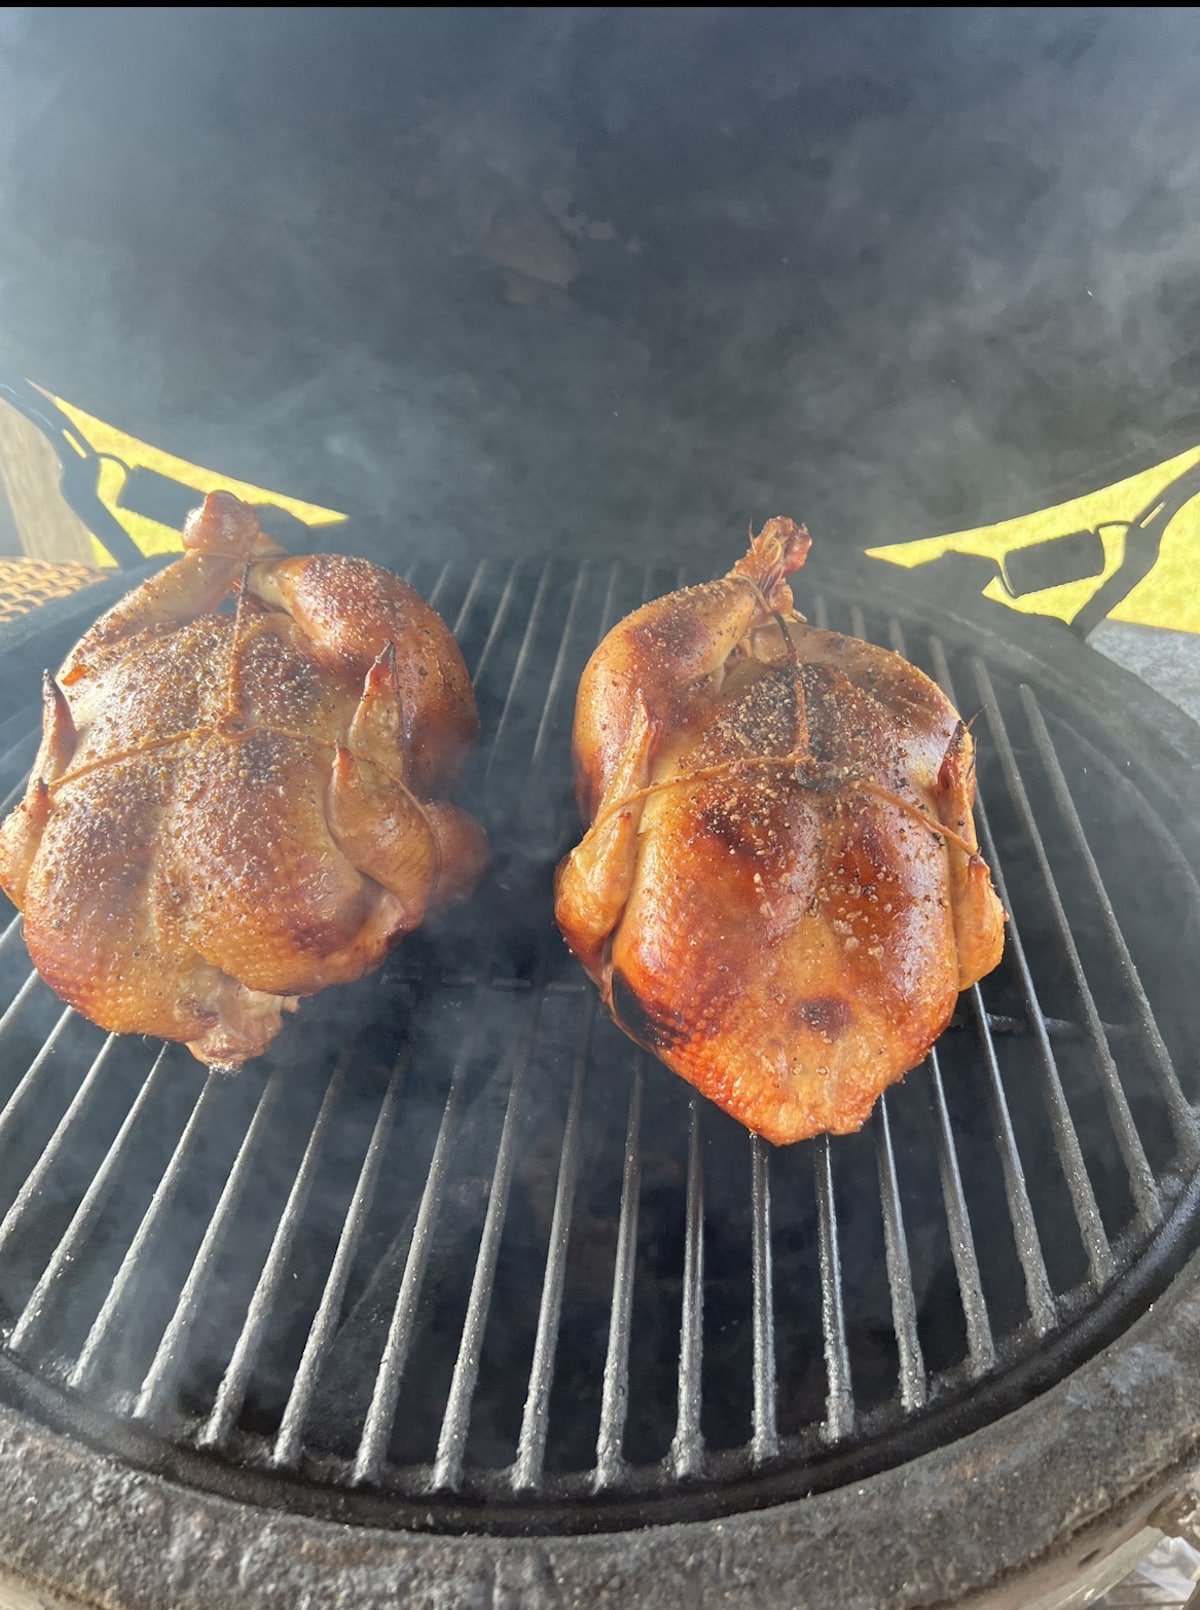 2 smoky chickens on a grill.